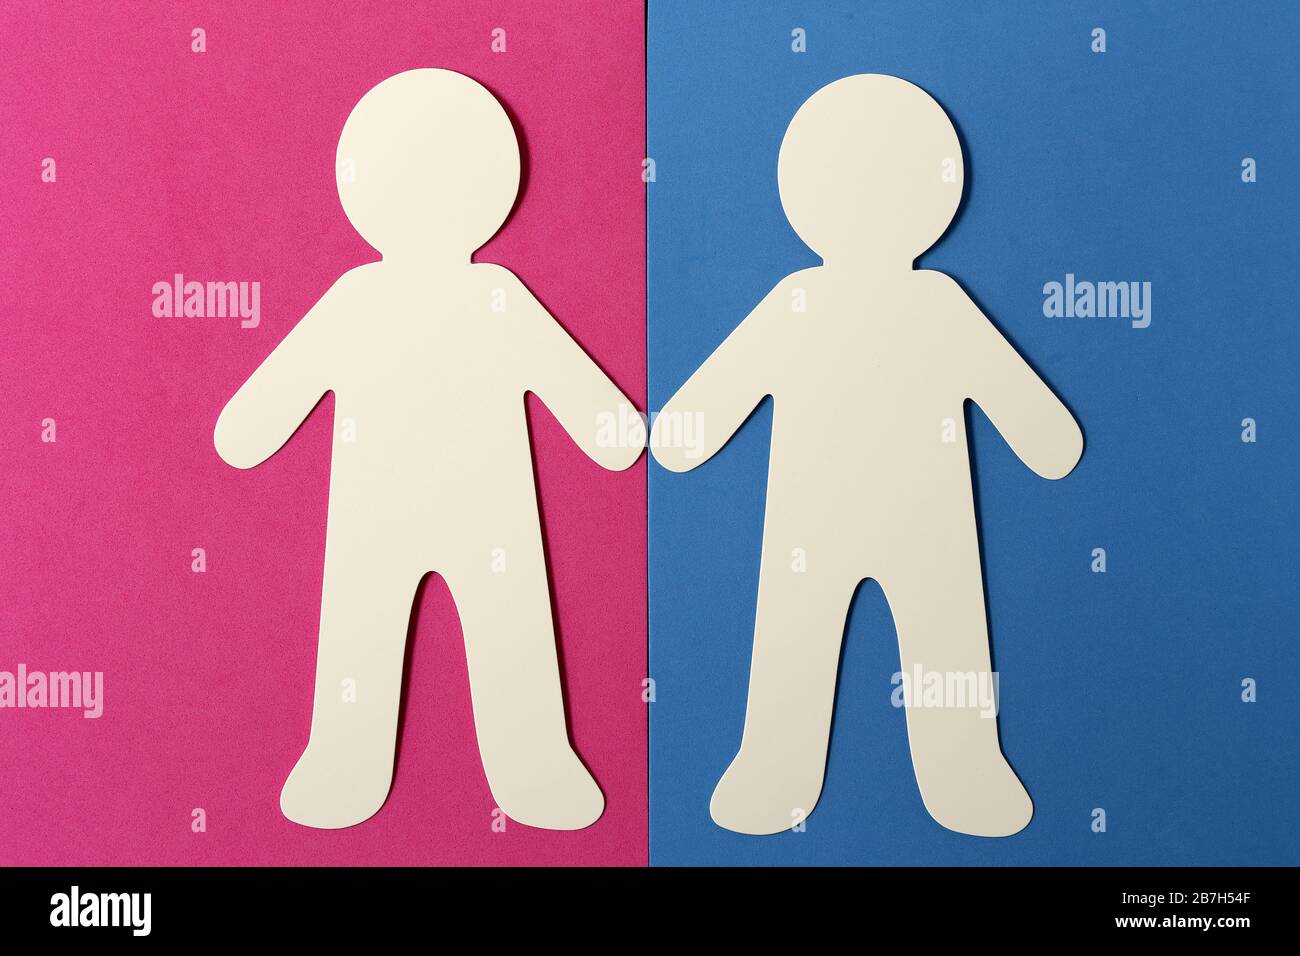 LGBT culture symbol, homosexual family concept,silhouette of women on colored flag Stock Photo